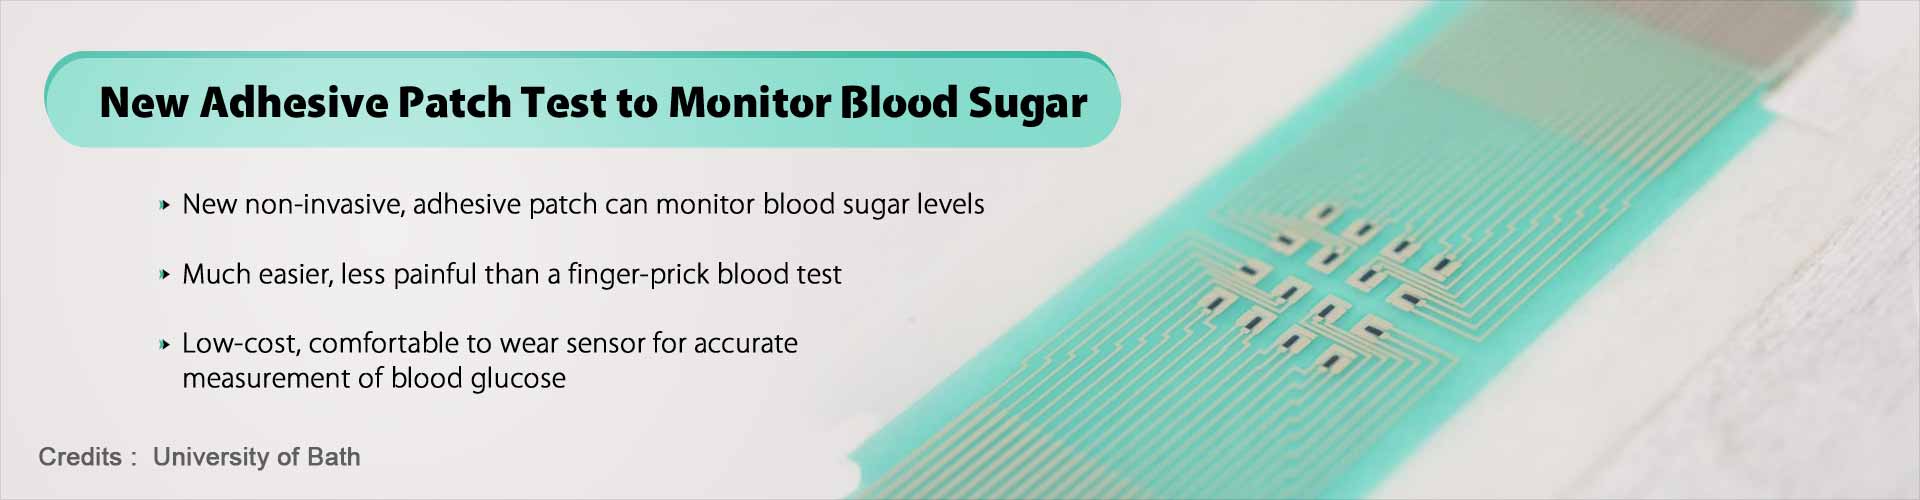 new adhesive patch test to monitor blood sugar
- new non-invasive, adhesive patch can monitor blood sugar levels
- much easier, less painful than a finger-prick blood test
- low-cost, comfortable to wear sensor for accurate measurement of blood glucose